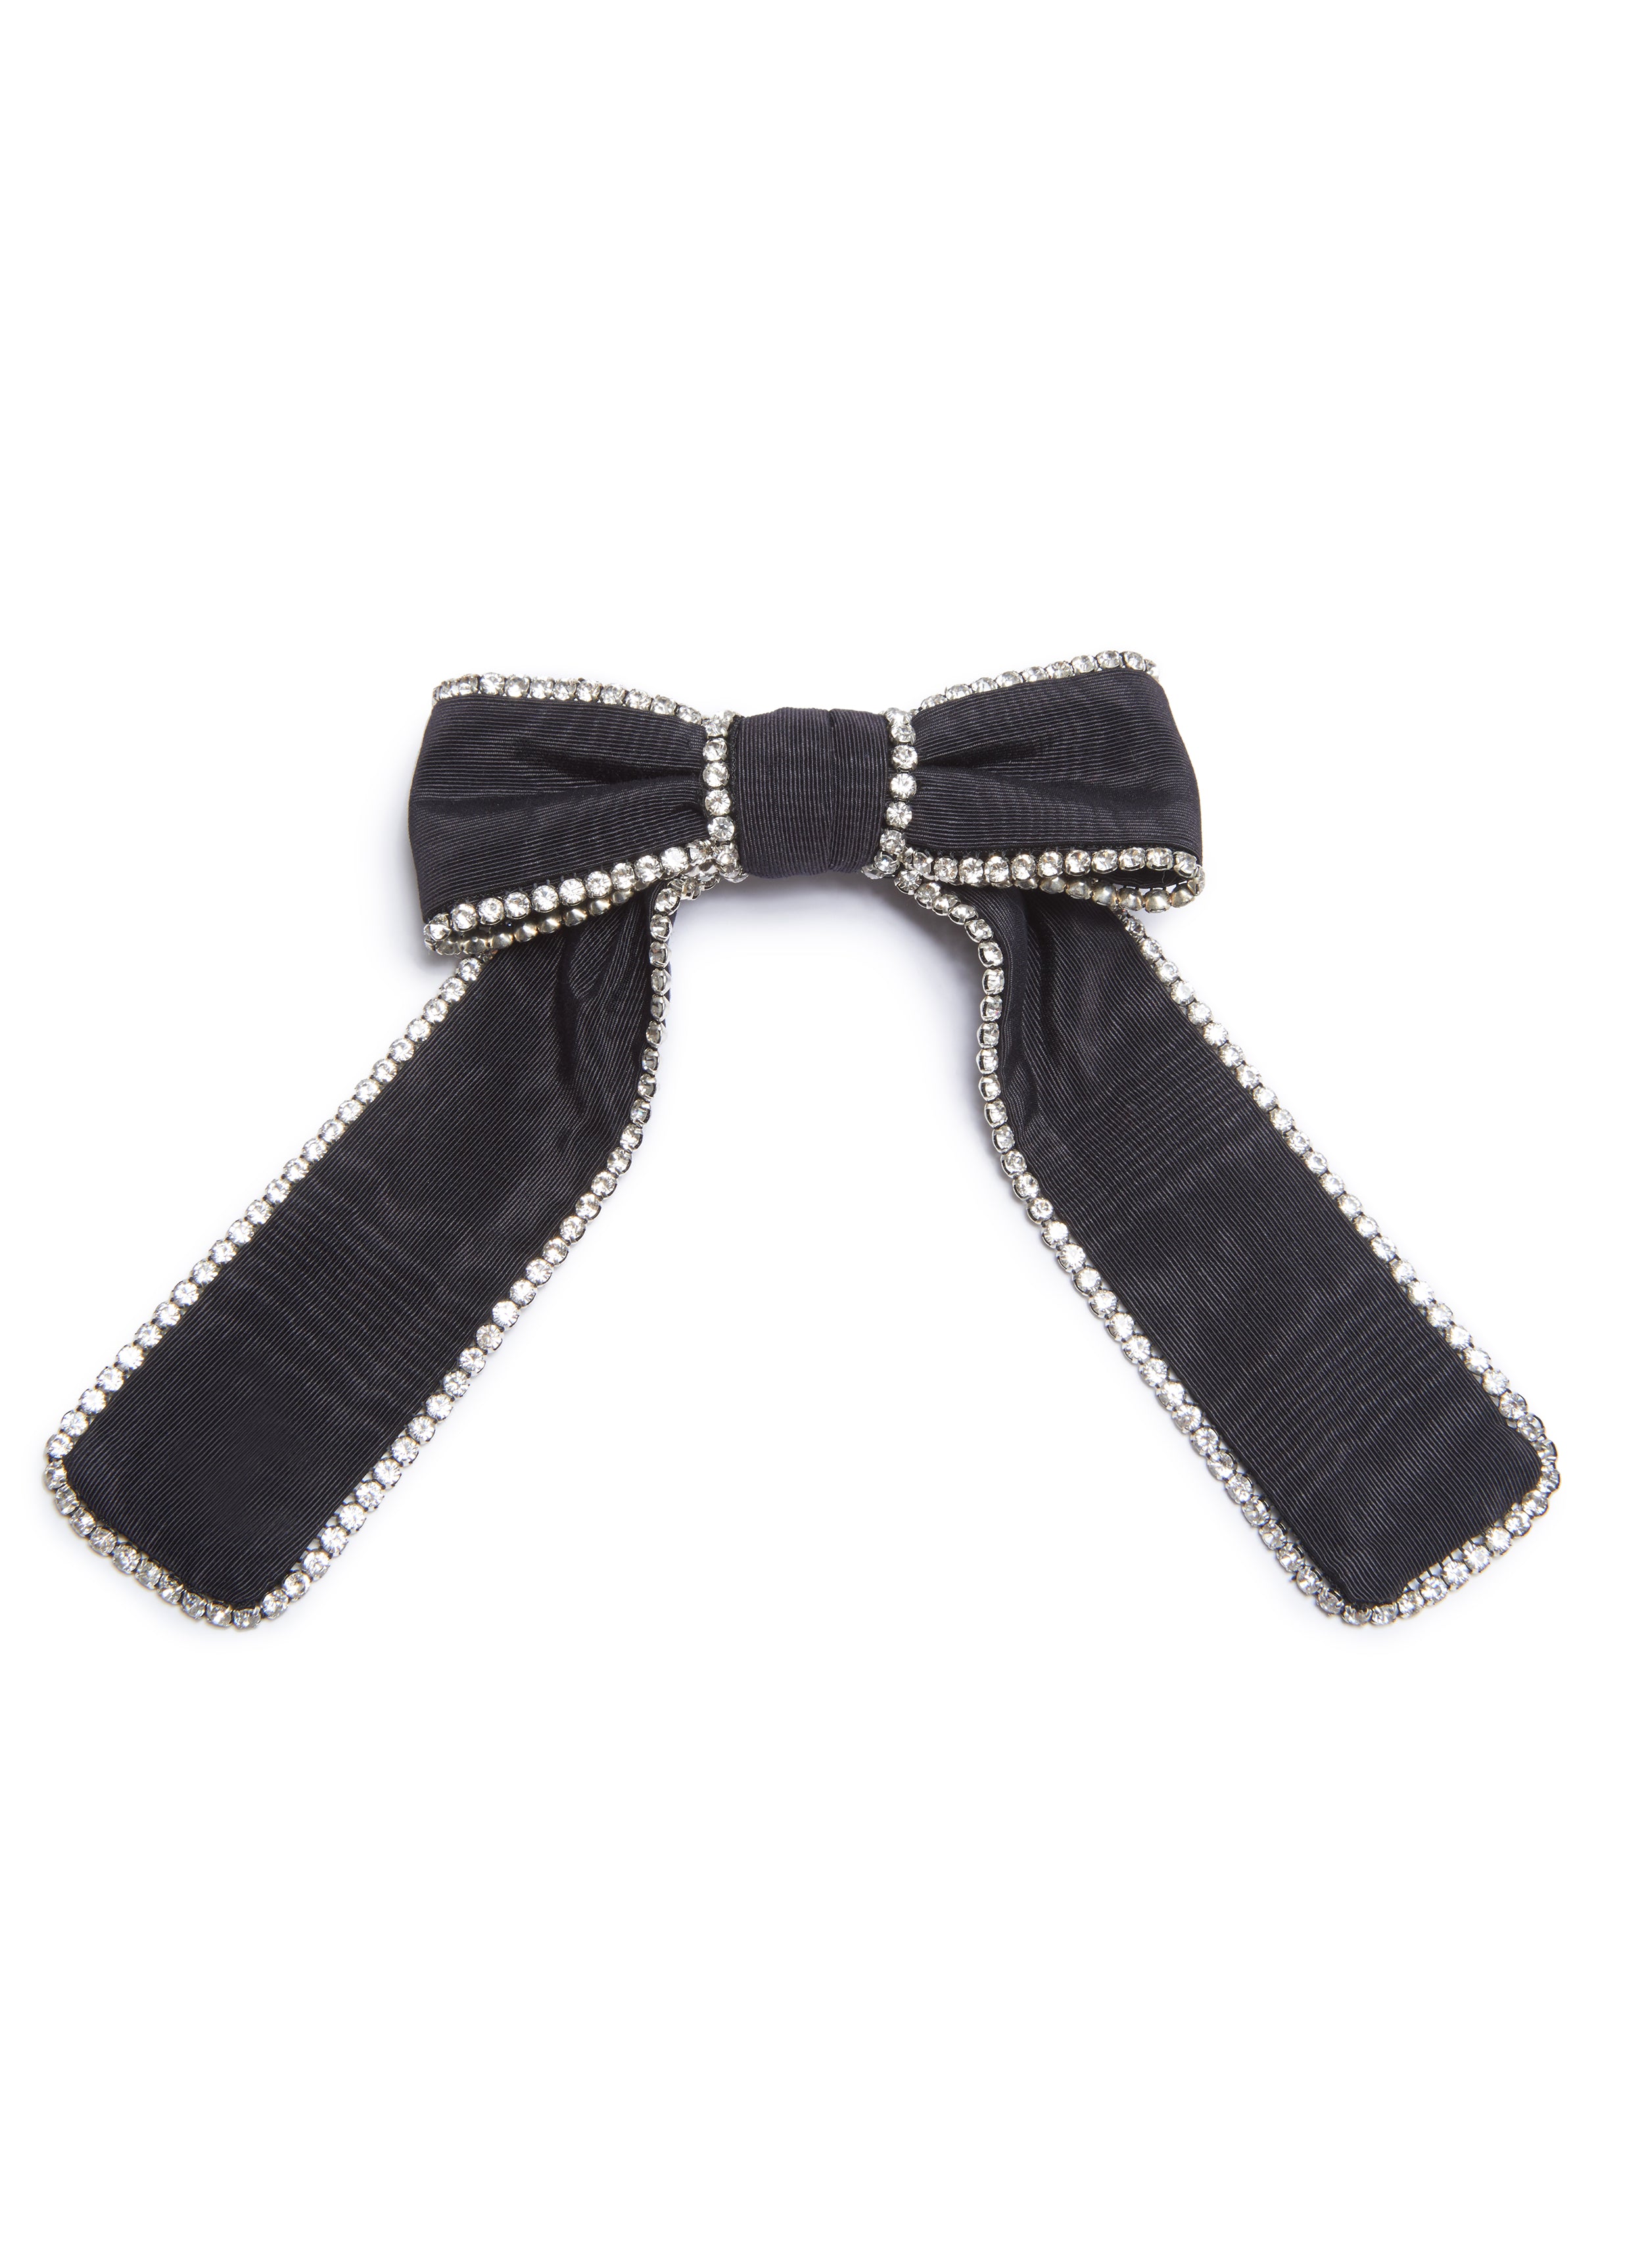 Black Moire Bow with Crystal Embellishments